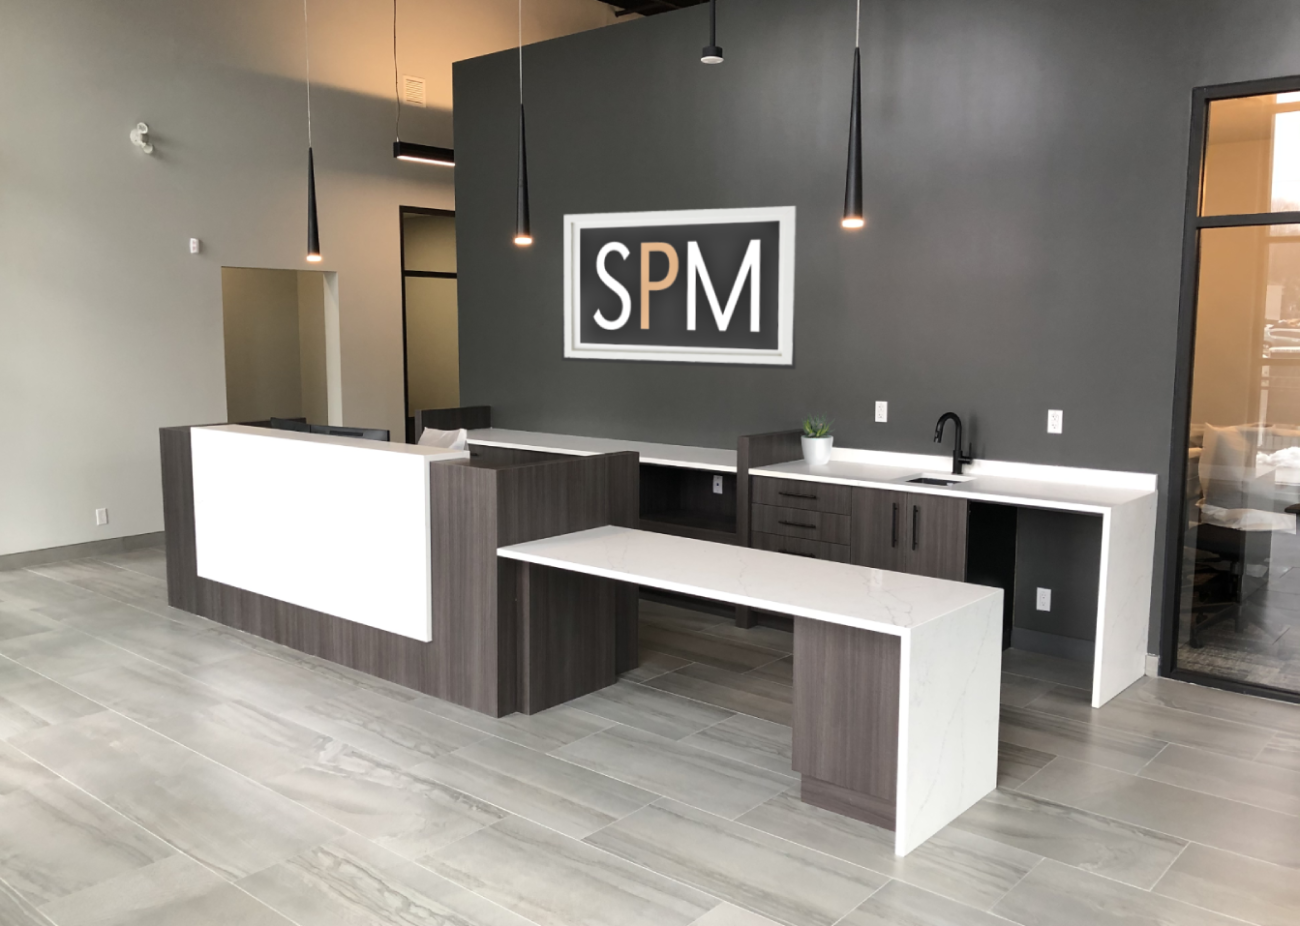 Announcing our New Home and New Name | SPM Financial